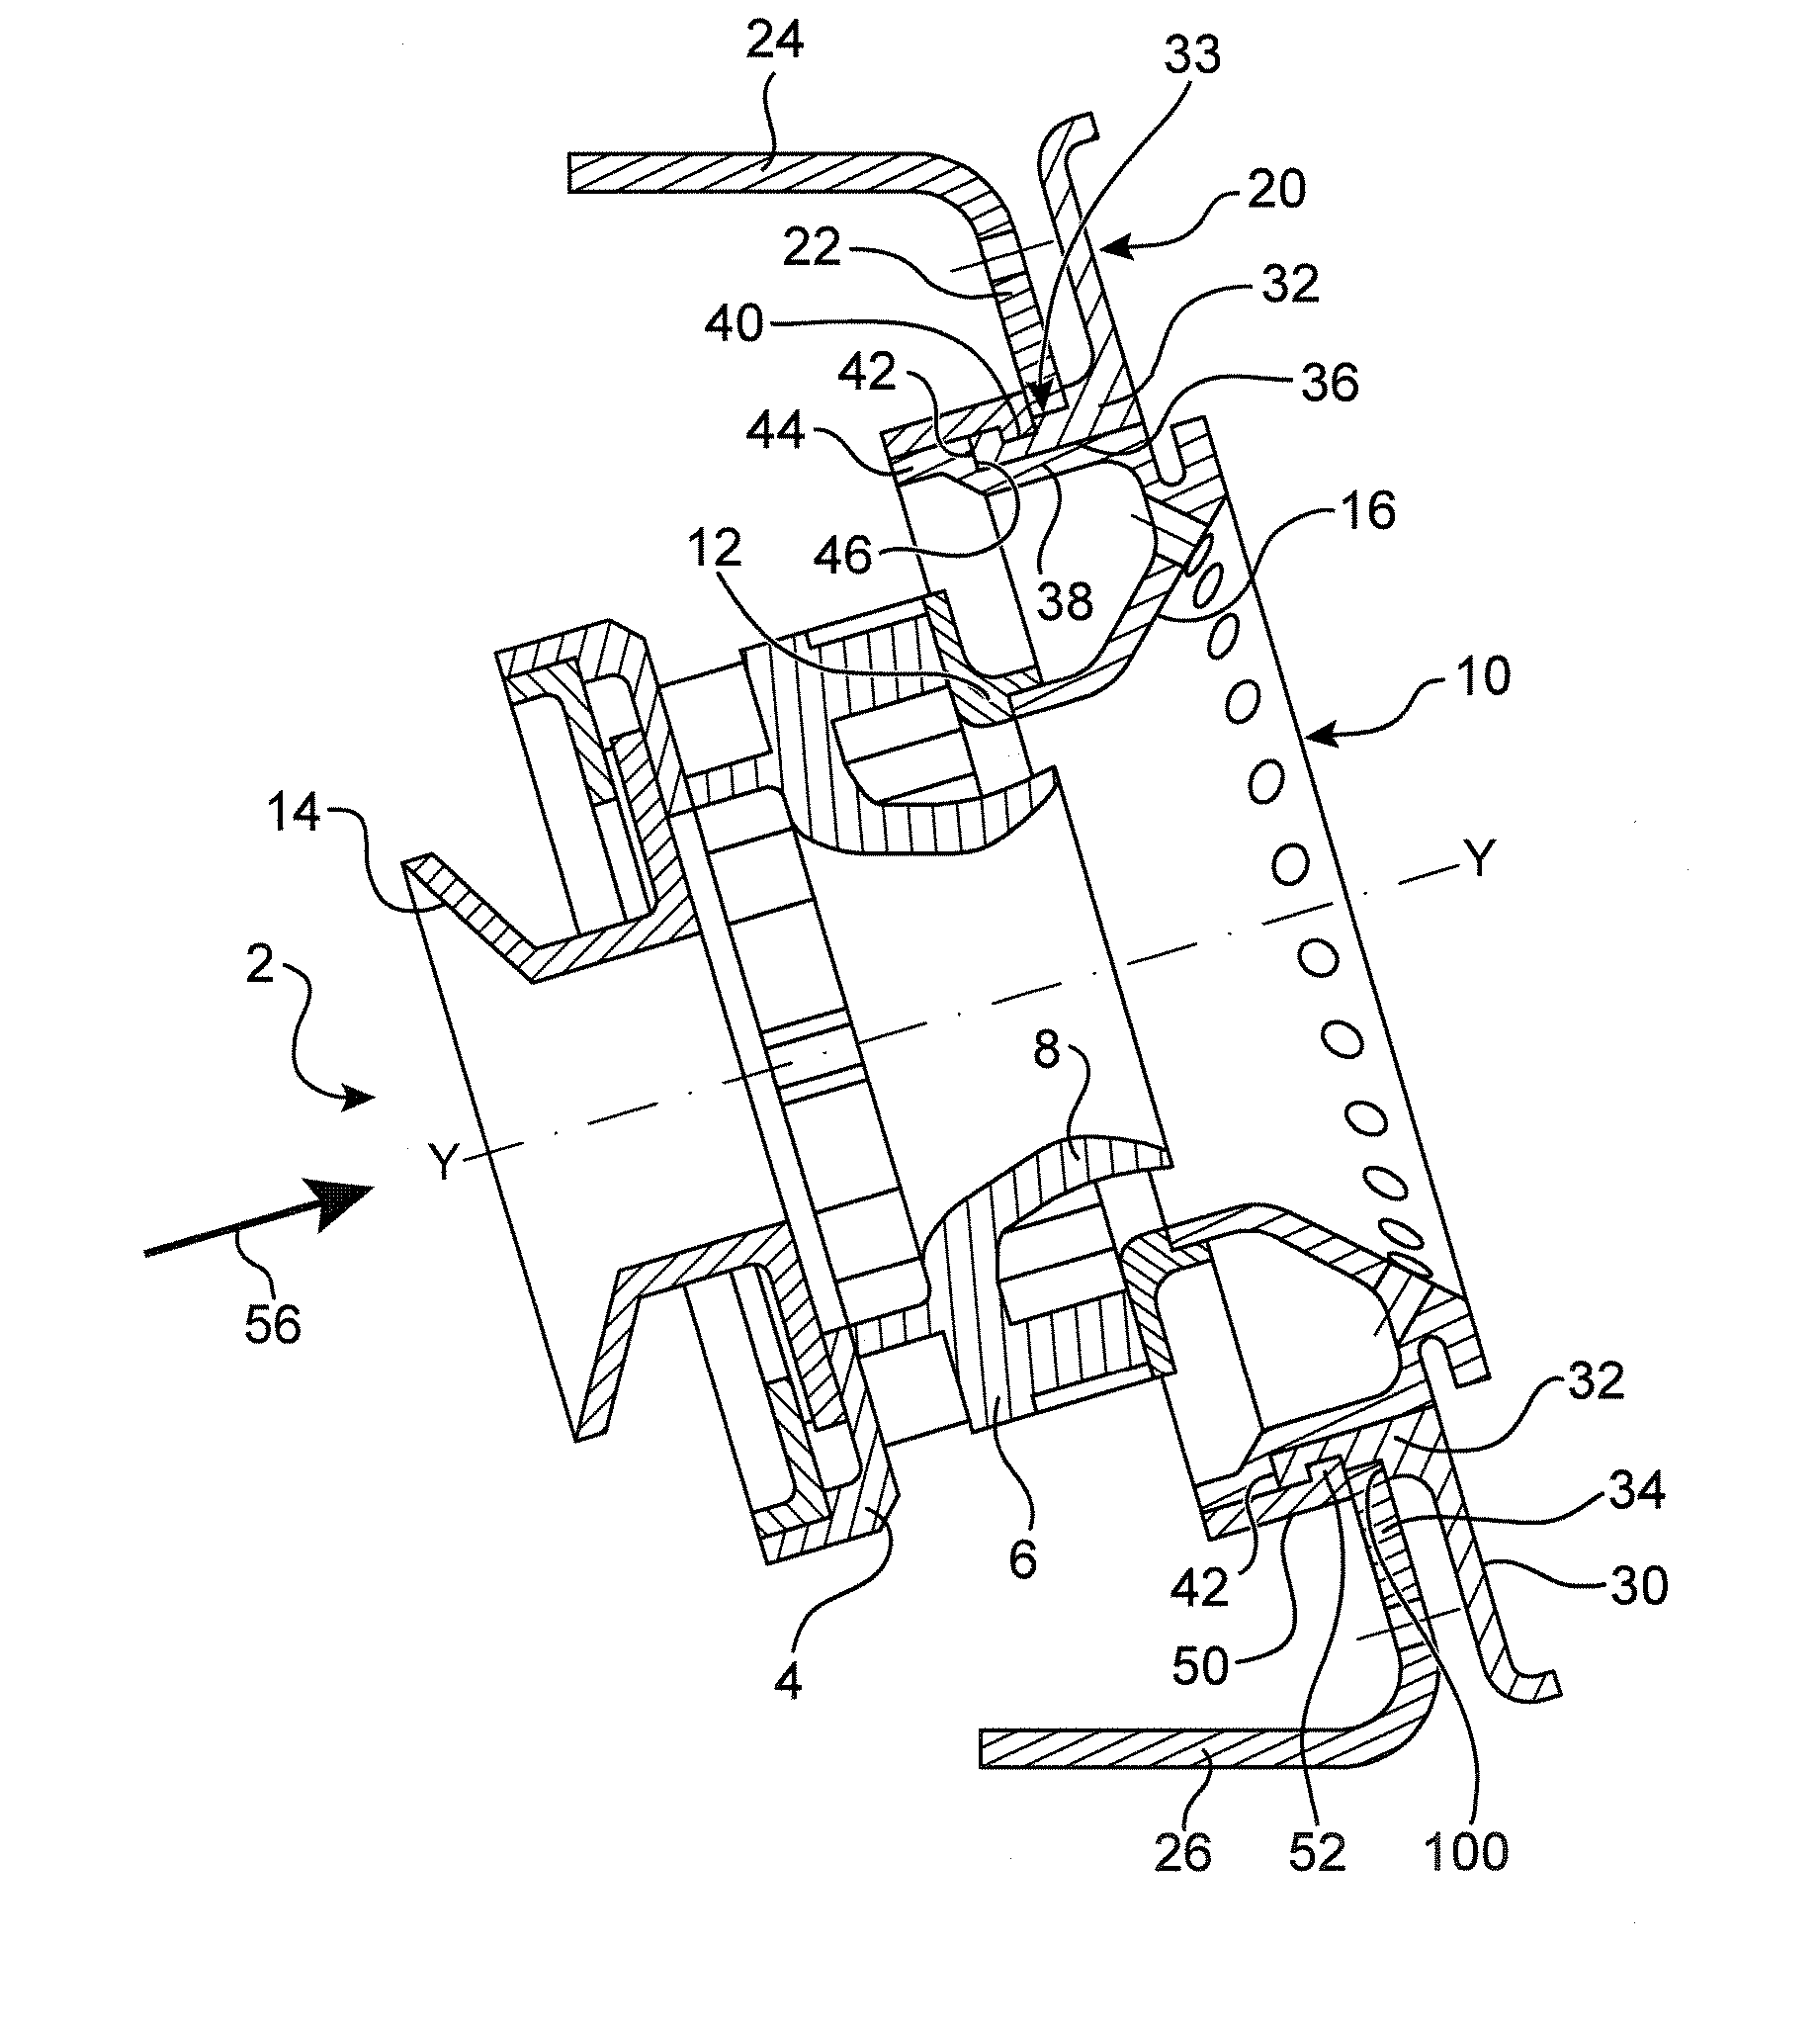 System of attaching an injection system to a turbojet combustion chamber base and method of attachment